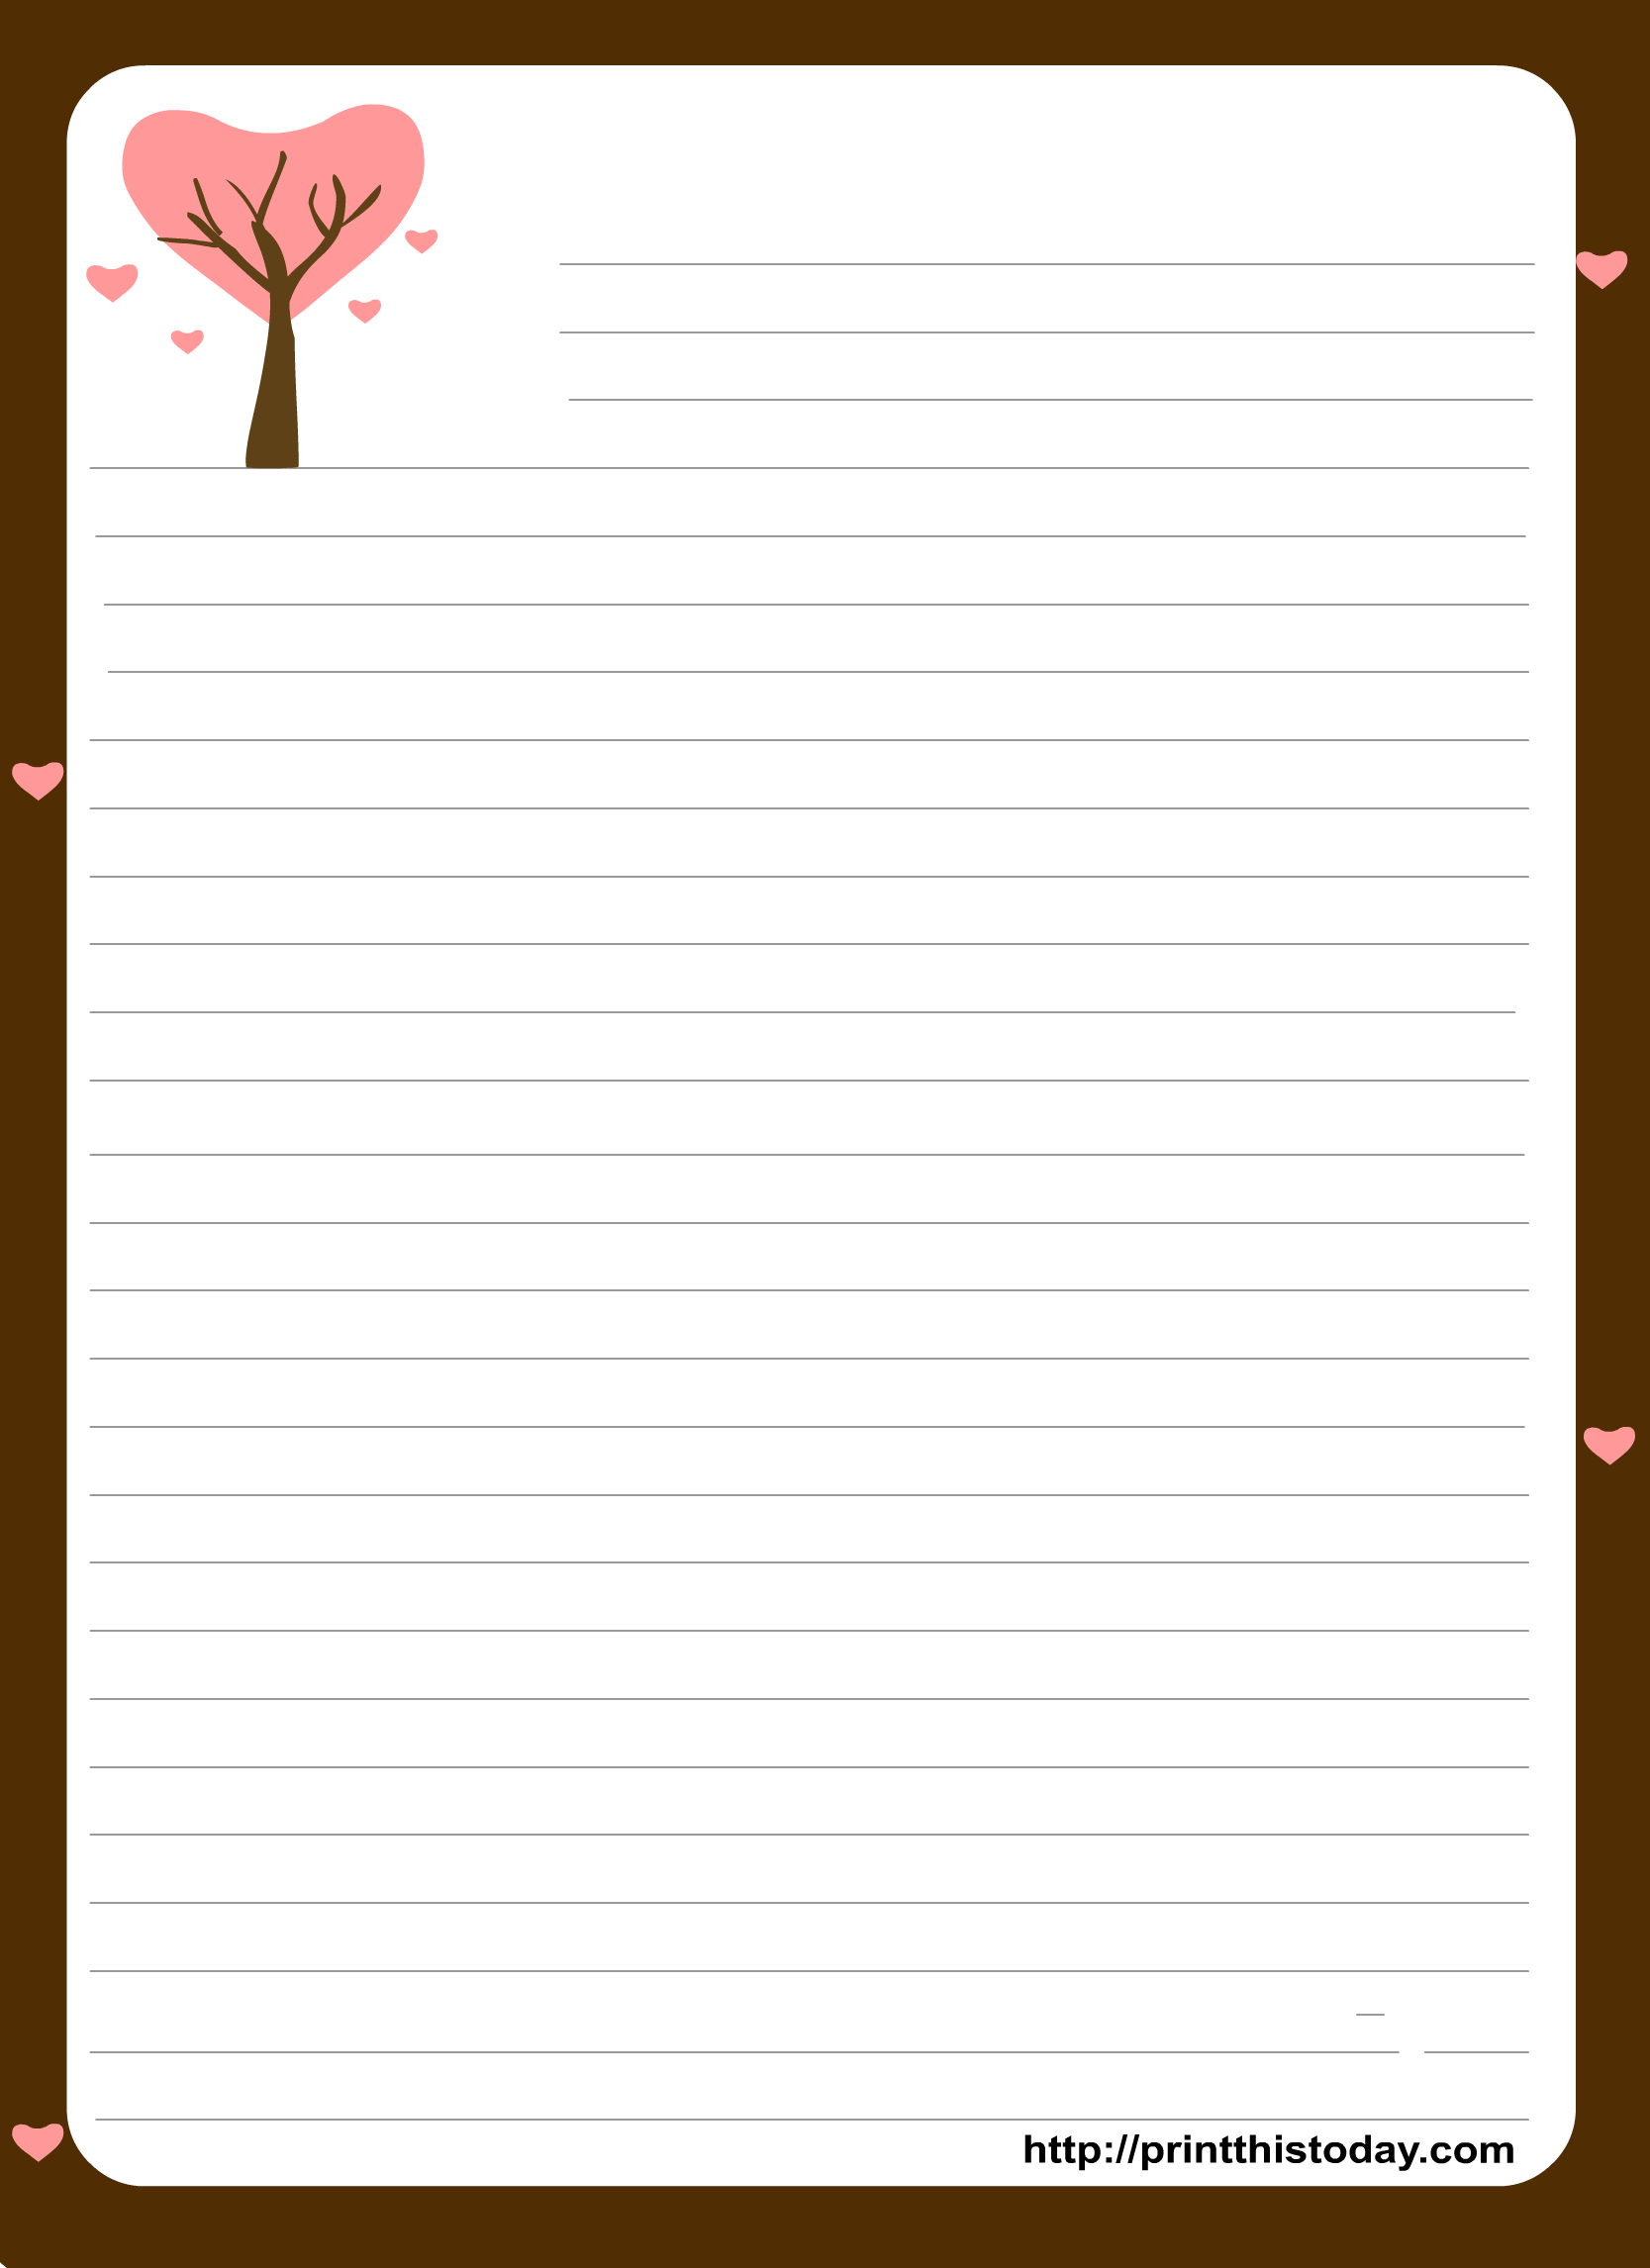 Love letter Pad stationery featuring Love Tree